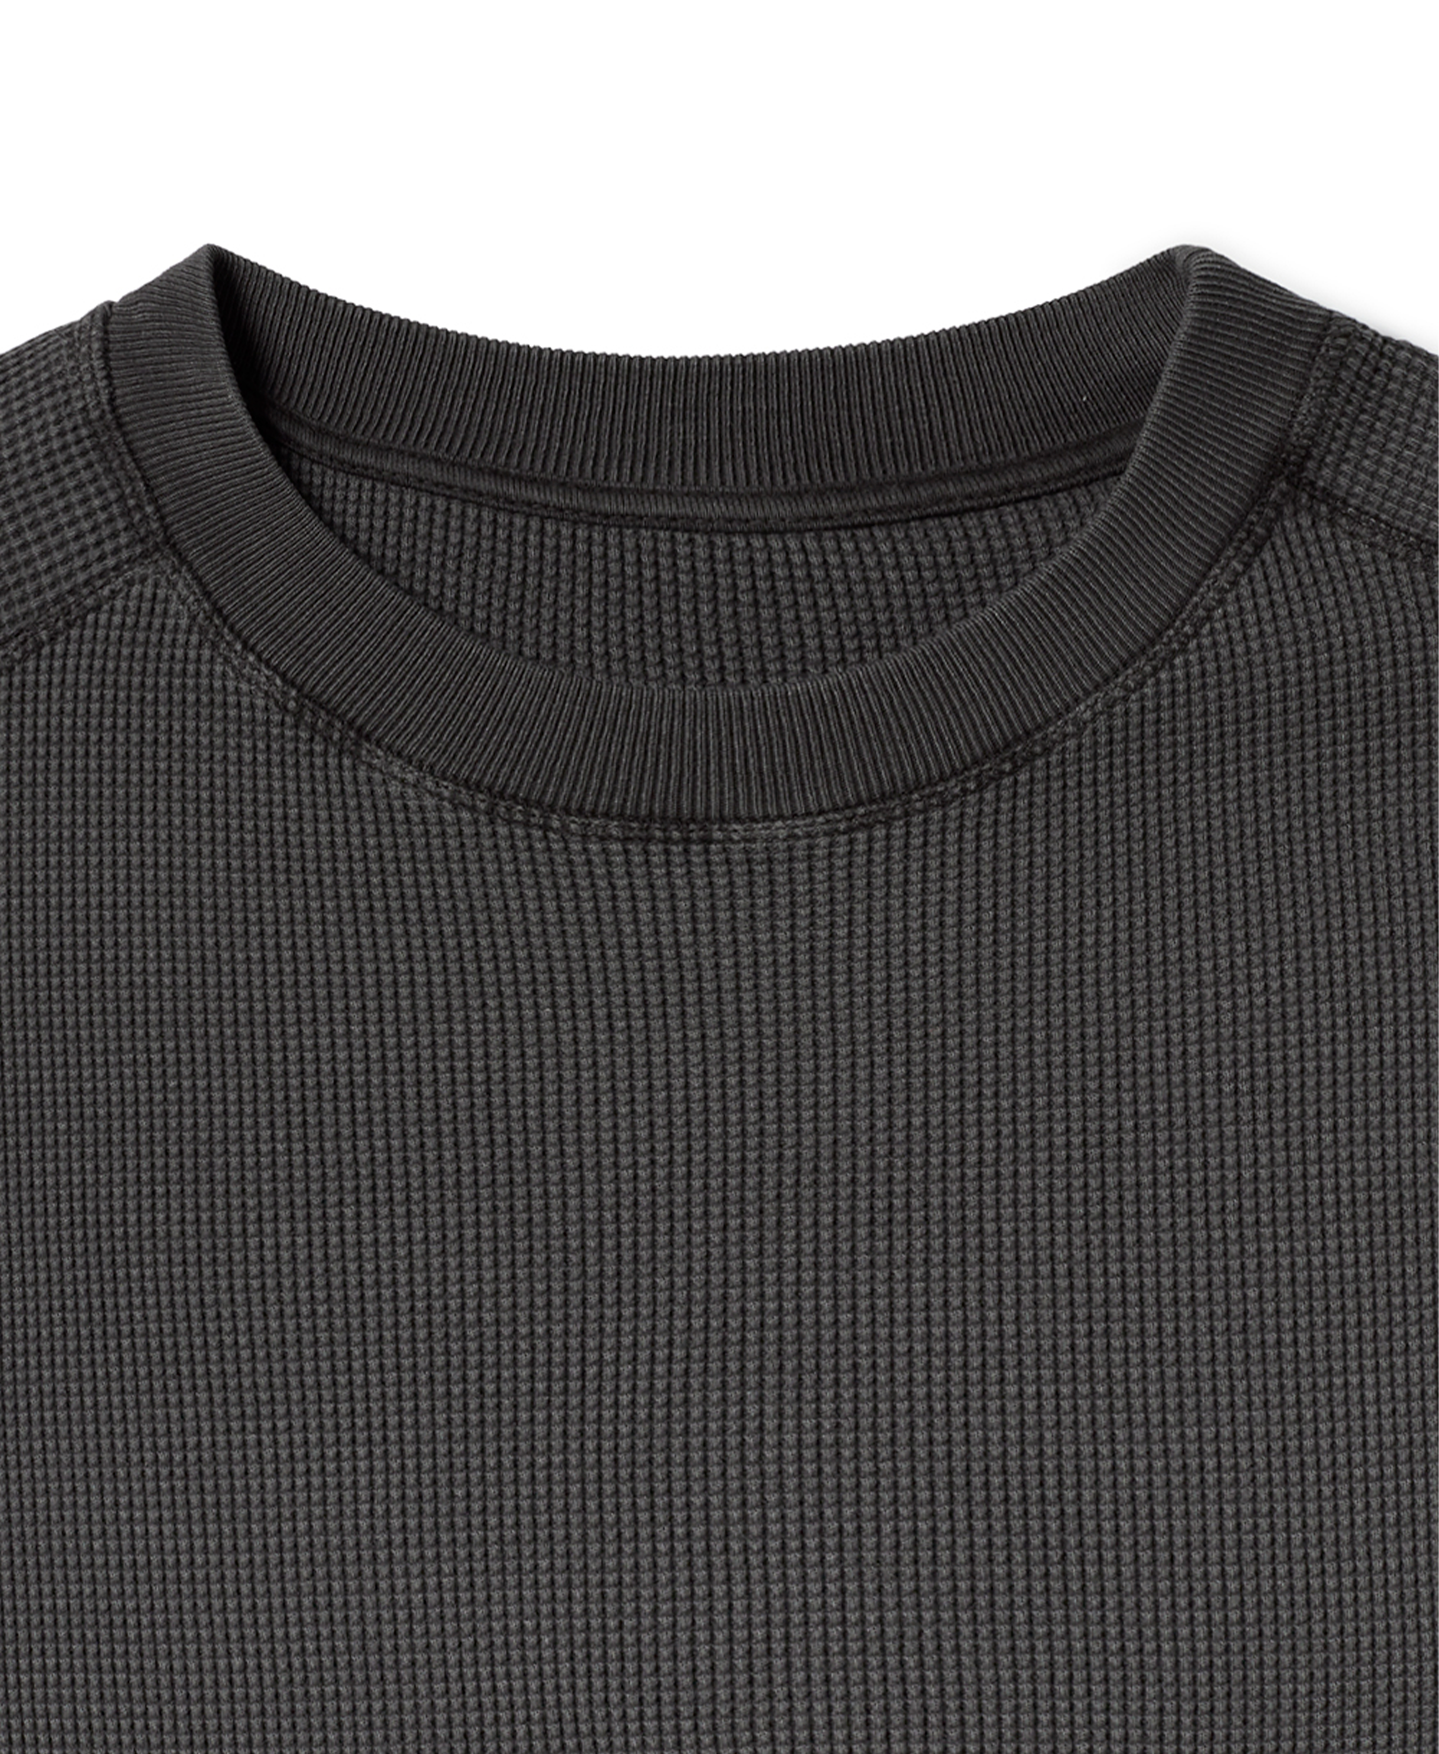 350 GSM 'Anthracite' Thermal Longsleeve